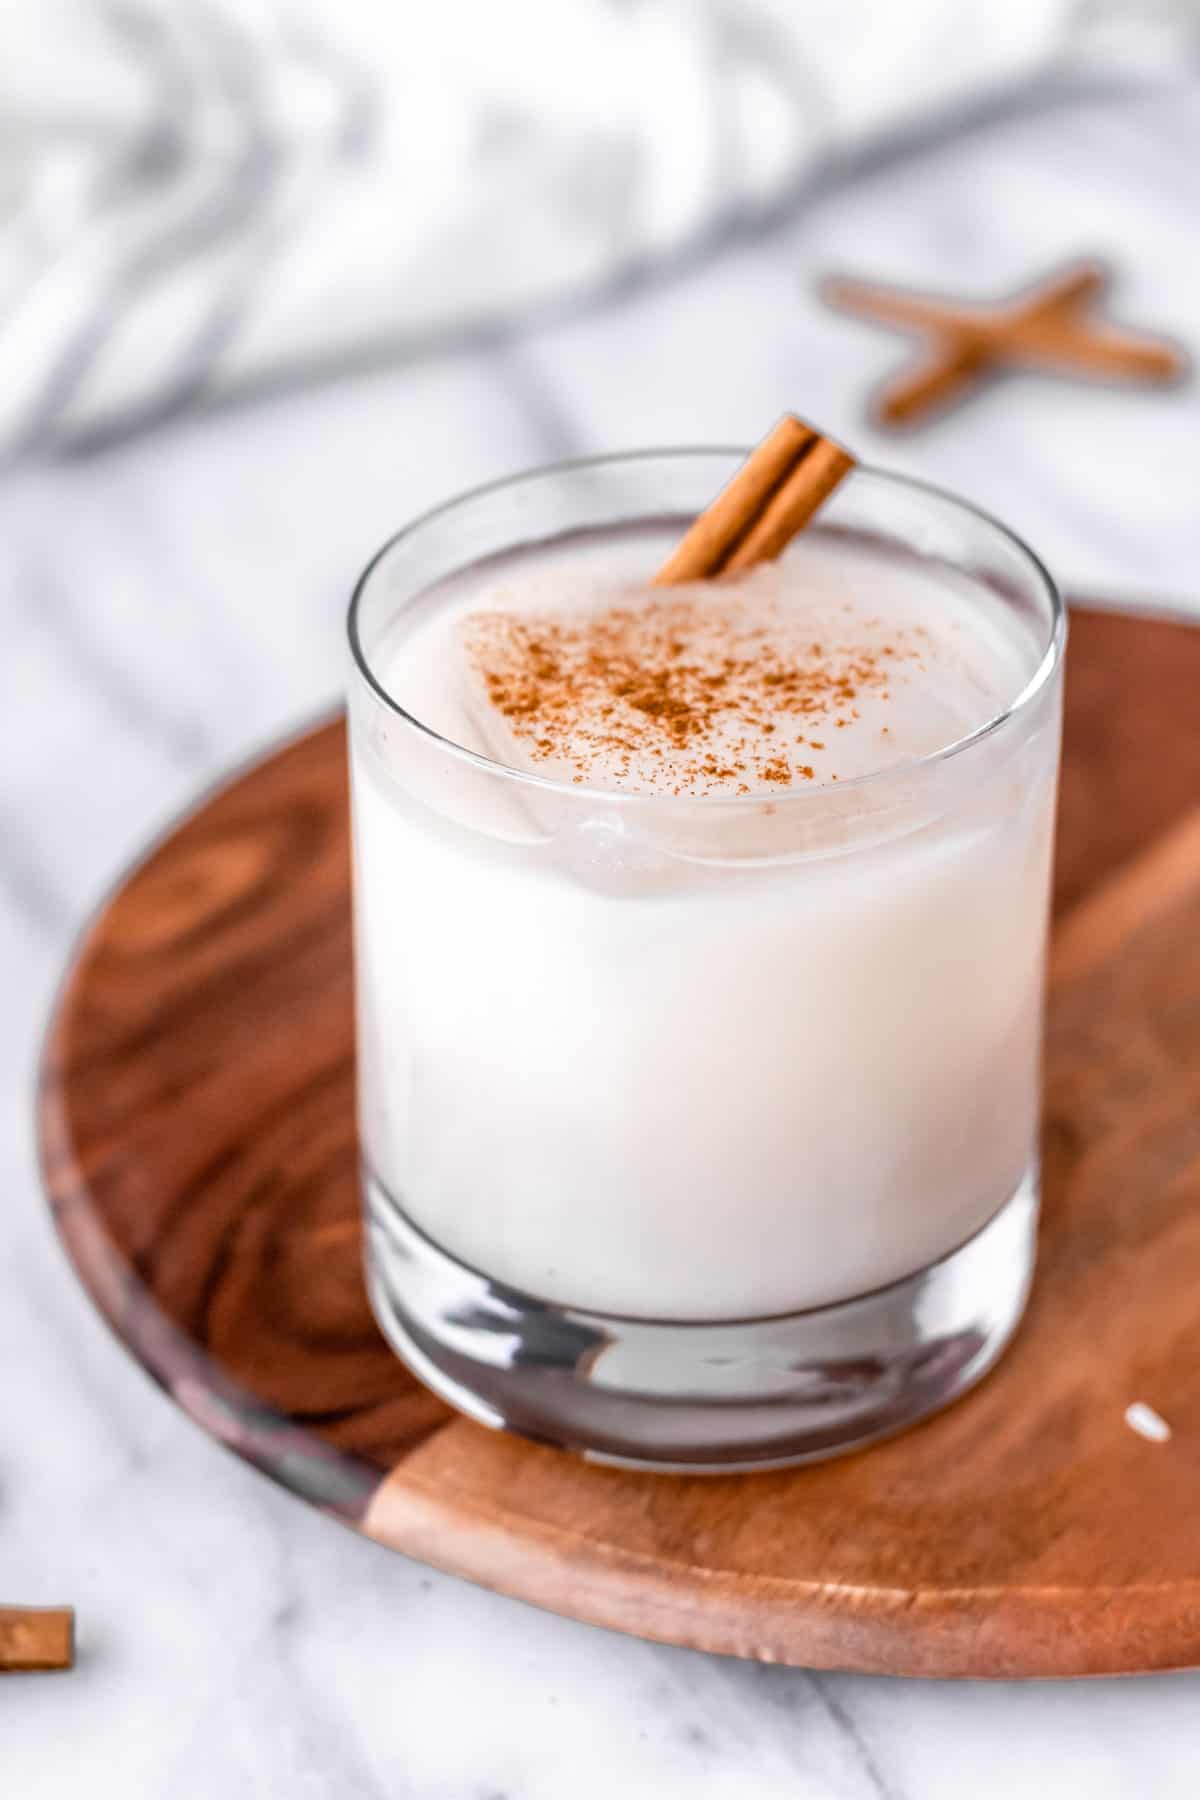 Close up of a glass of horchata with cinnamon sticks and ice in it on a wood server with a striped towel in the background.